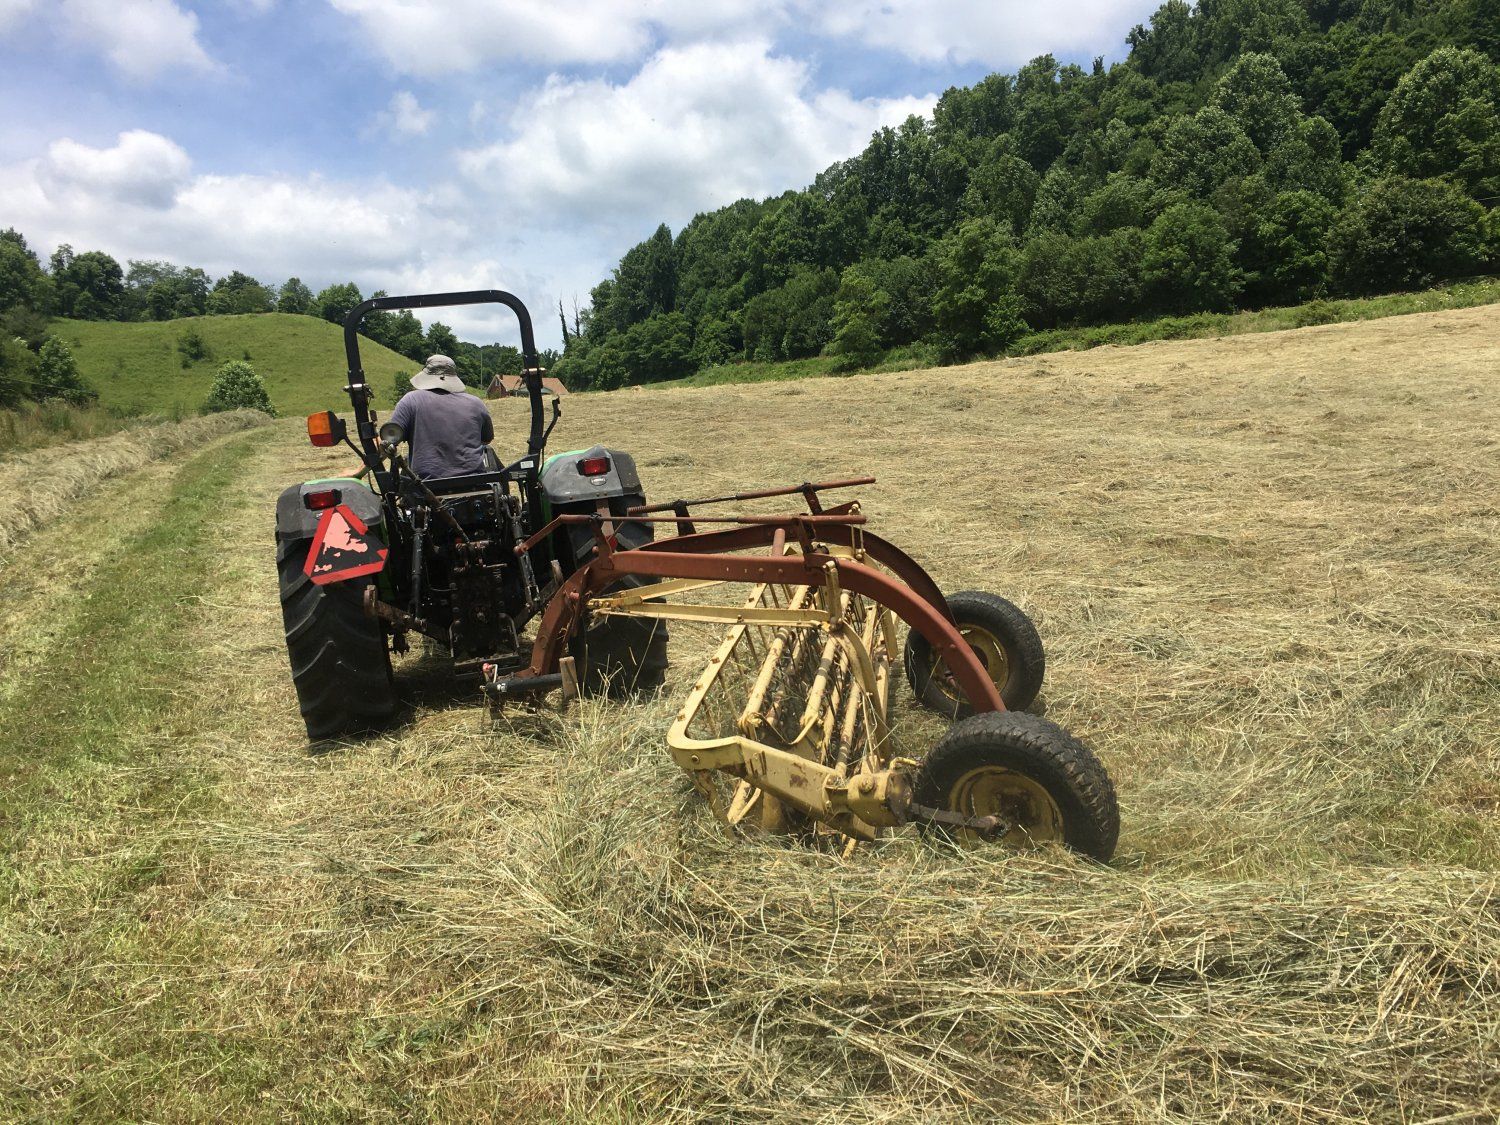 Sixth Week of 2021 CSA, Making Hay While the Sun Shine and the Breeze Blows